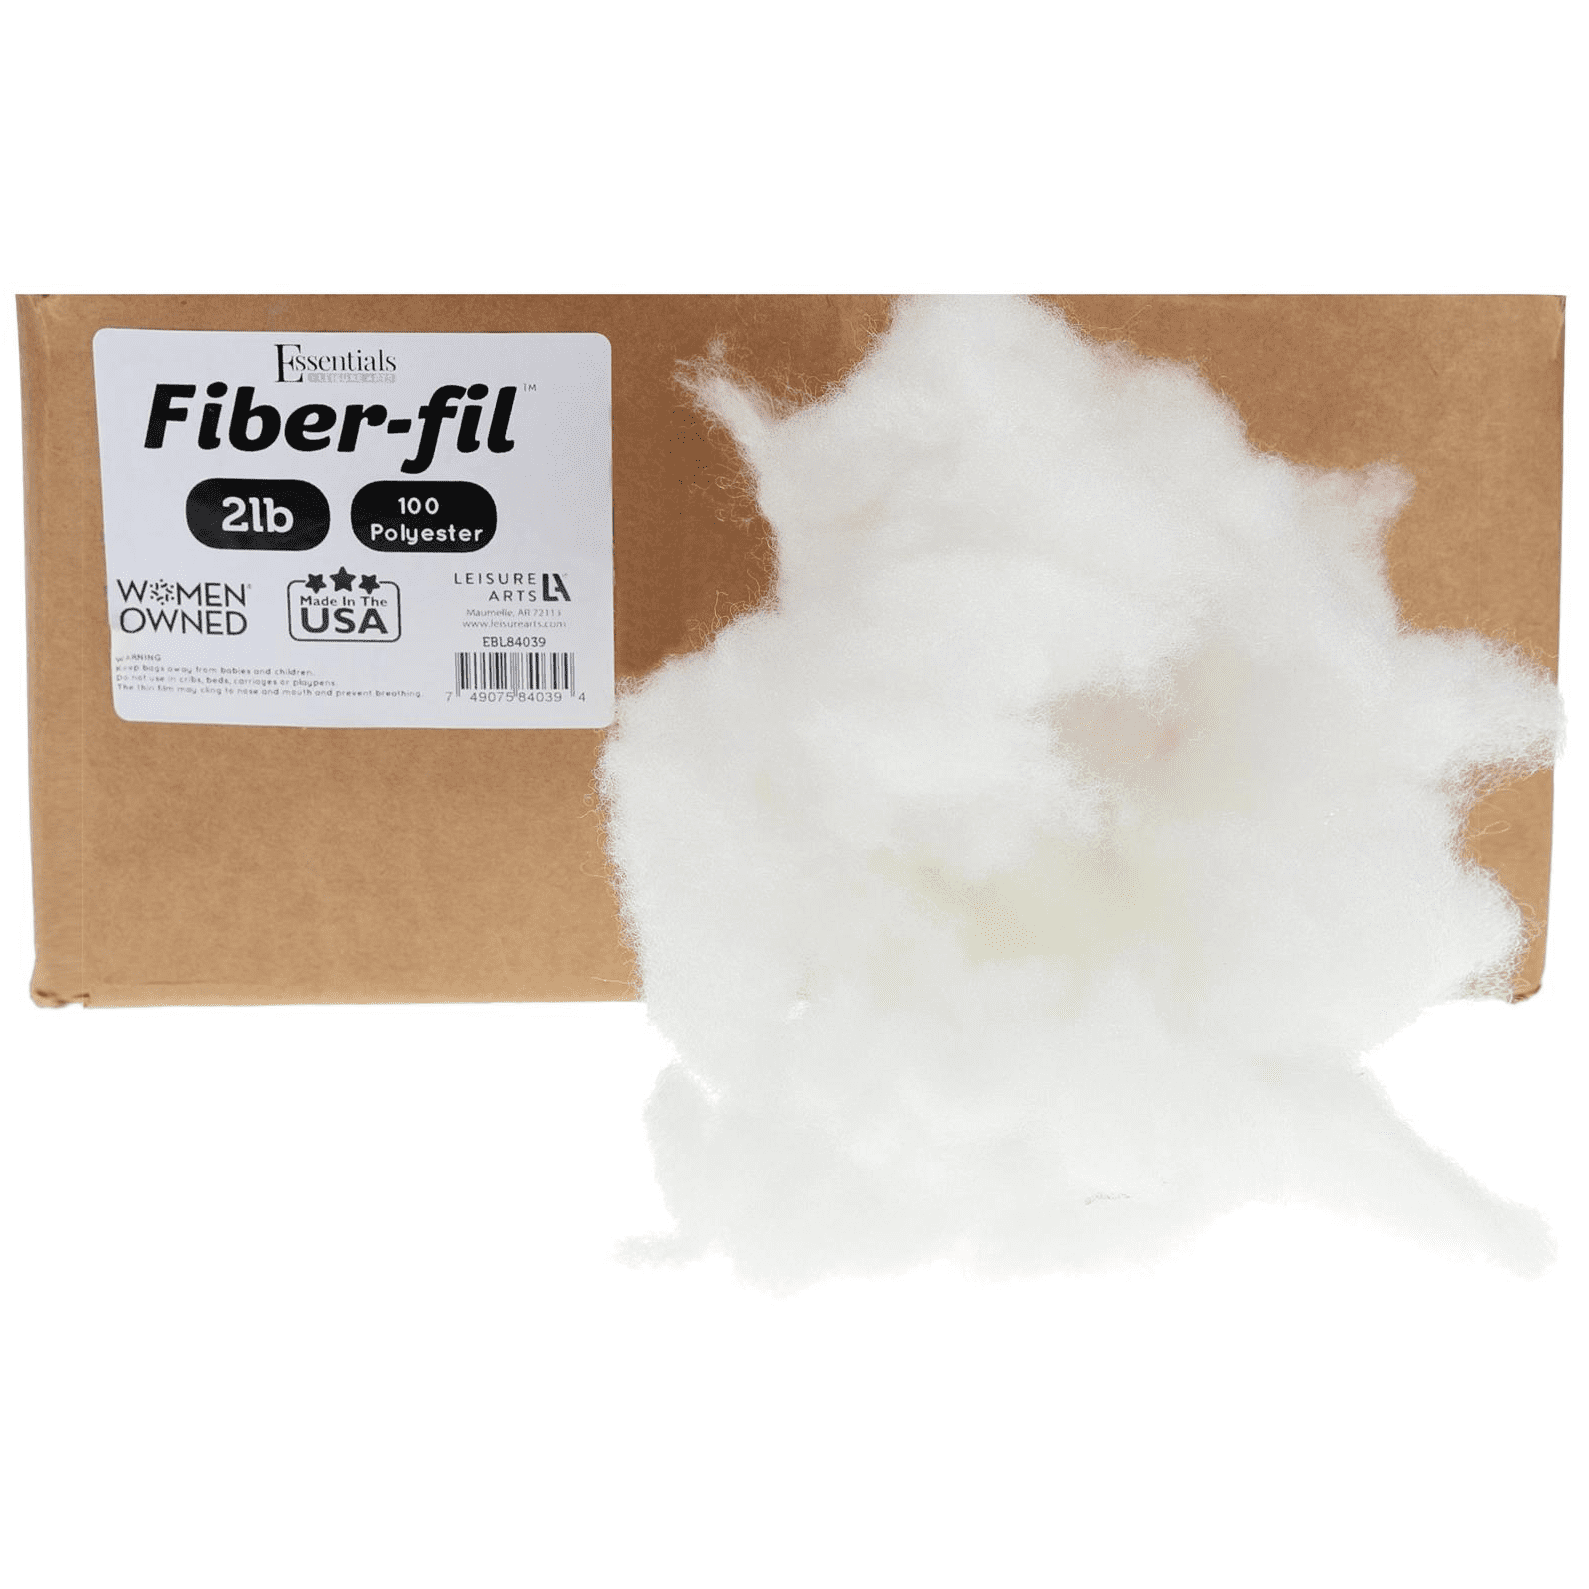 Essentials by Leisure Arts Polyester Fiber-Fil, Premium Fiber-Fil Stuffing,  2lb/32oz Box, High Resilience Polyfill for filling Stuffed Animals, Crafts,  Pillow Stuffing, Cushion Stuffing 